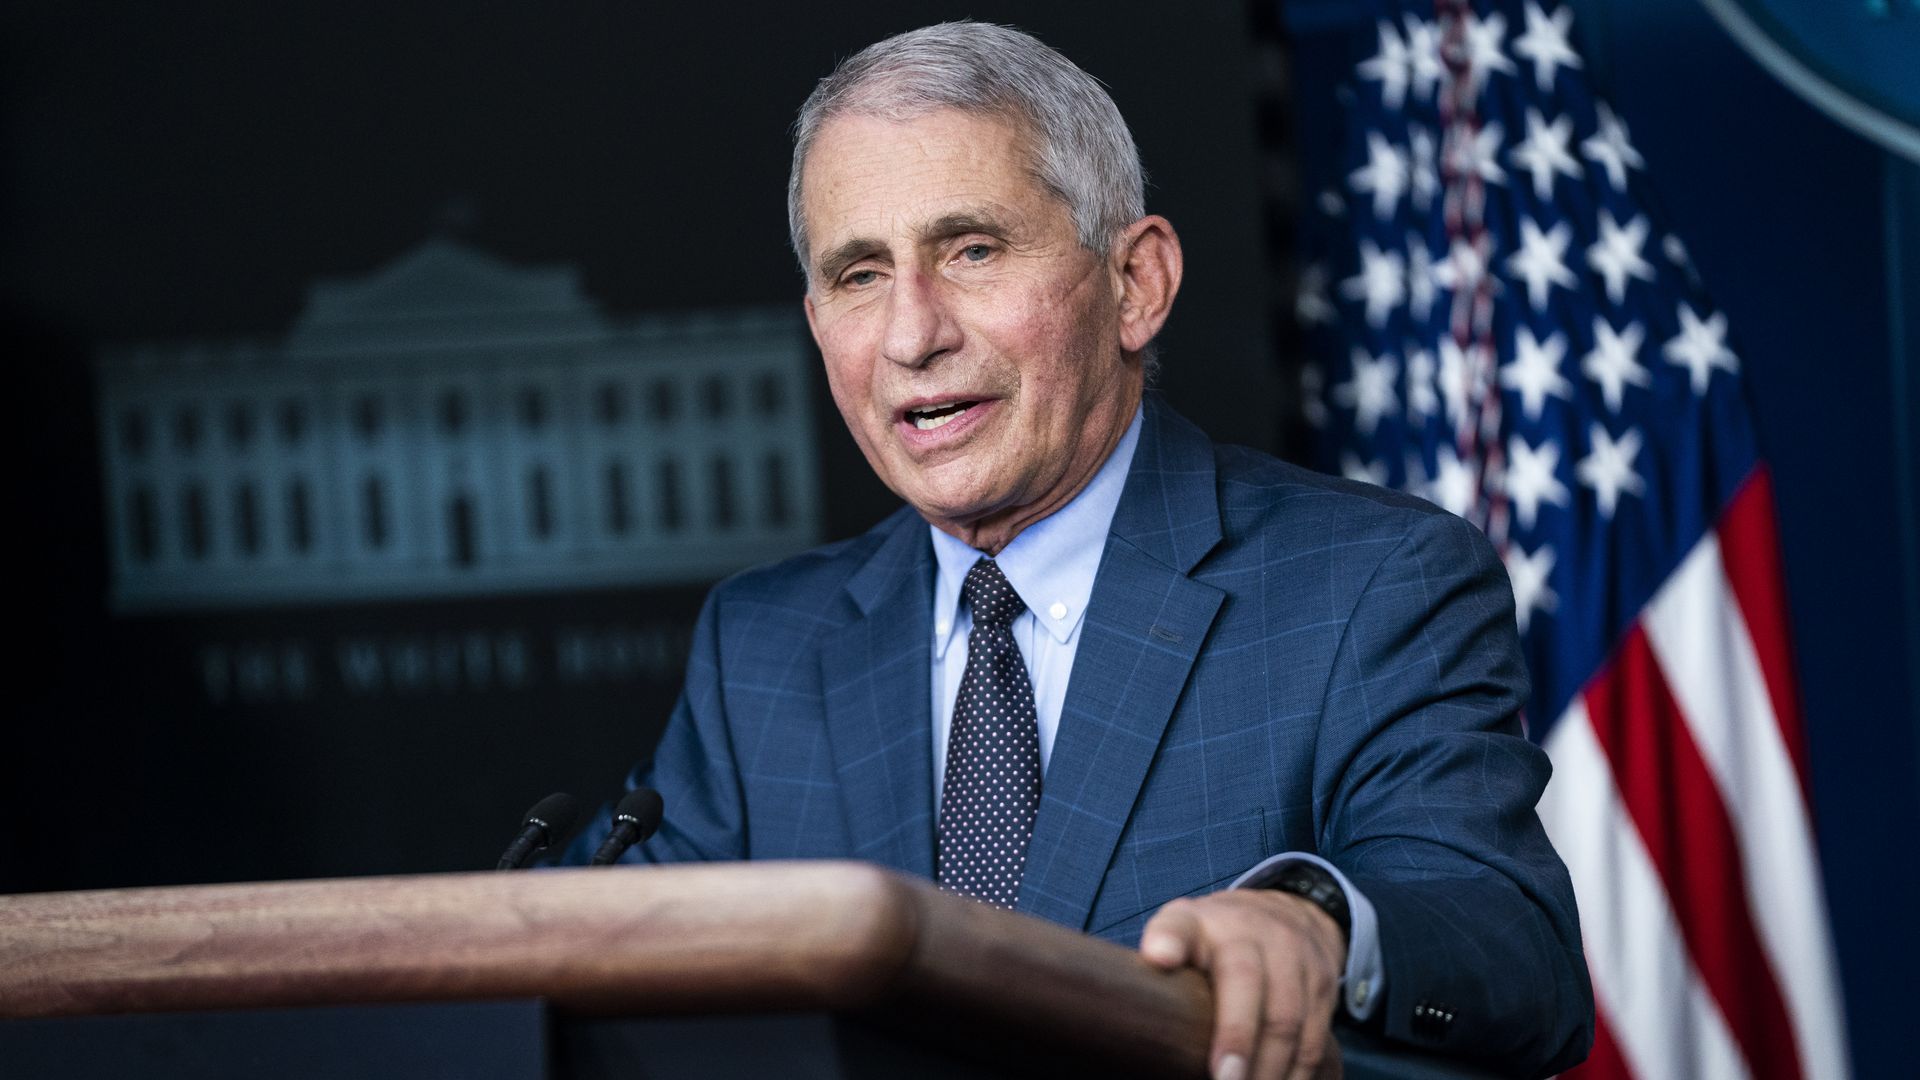 Anthony Fauci speaking in the White House in November 2020.